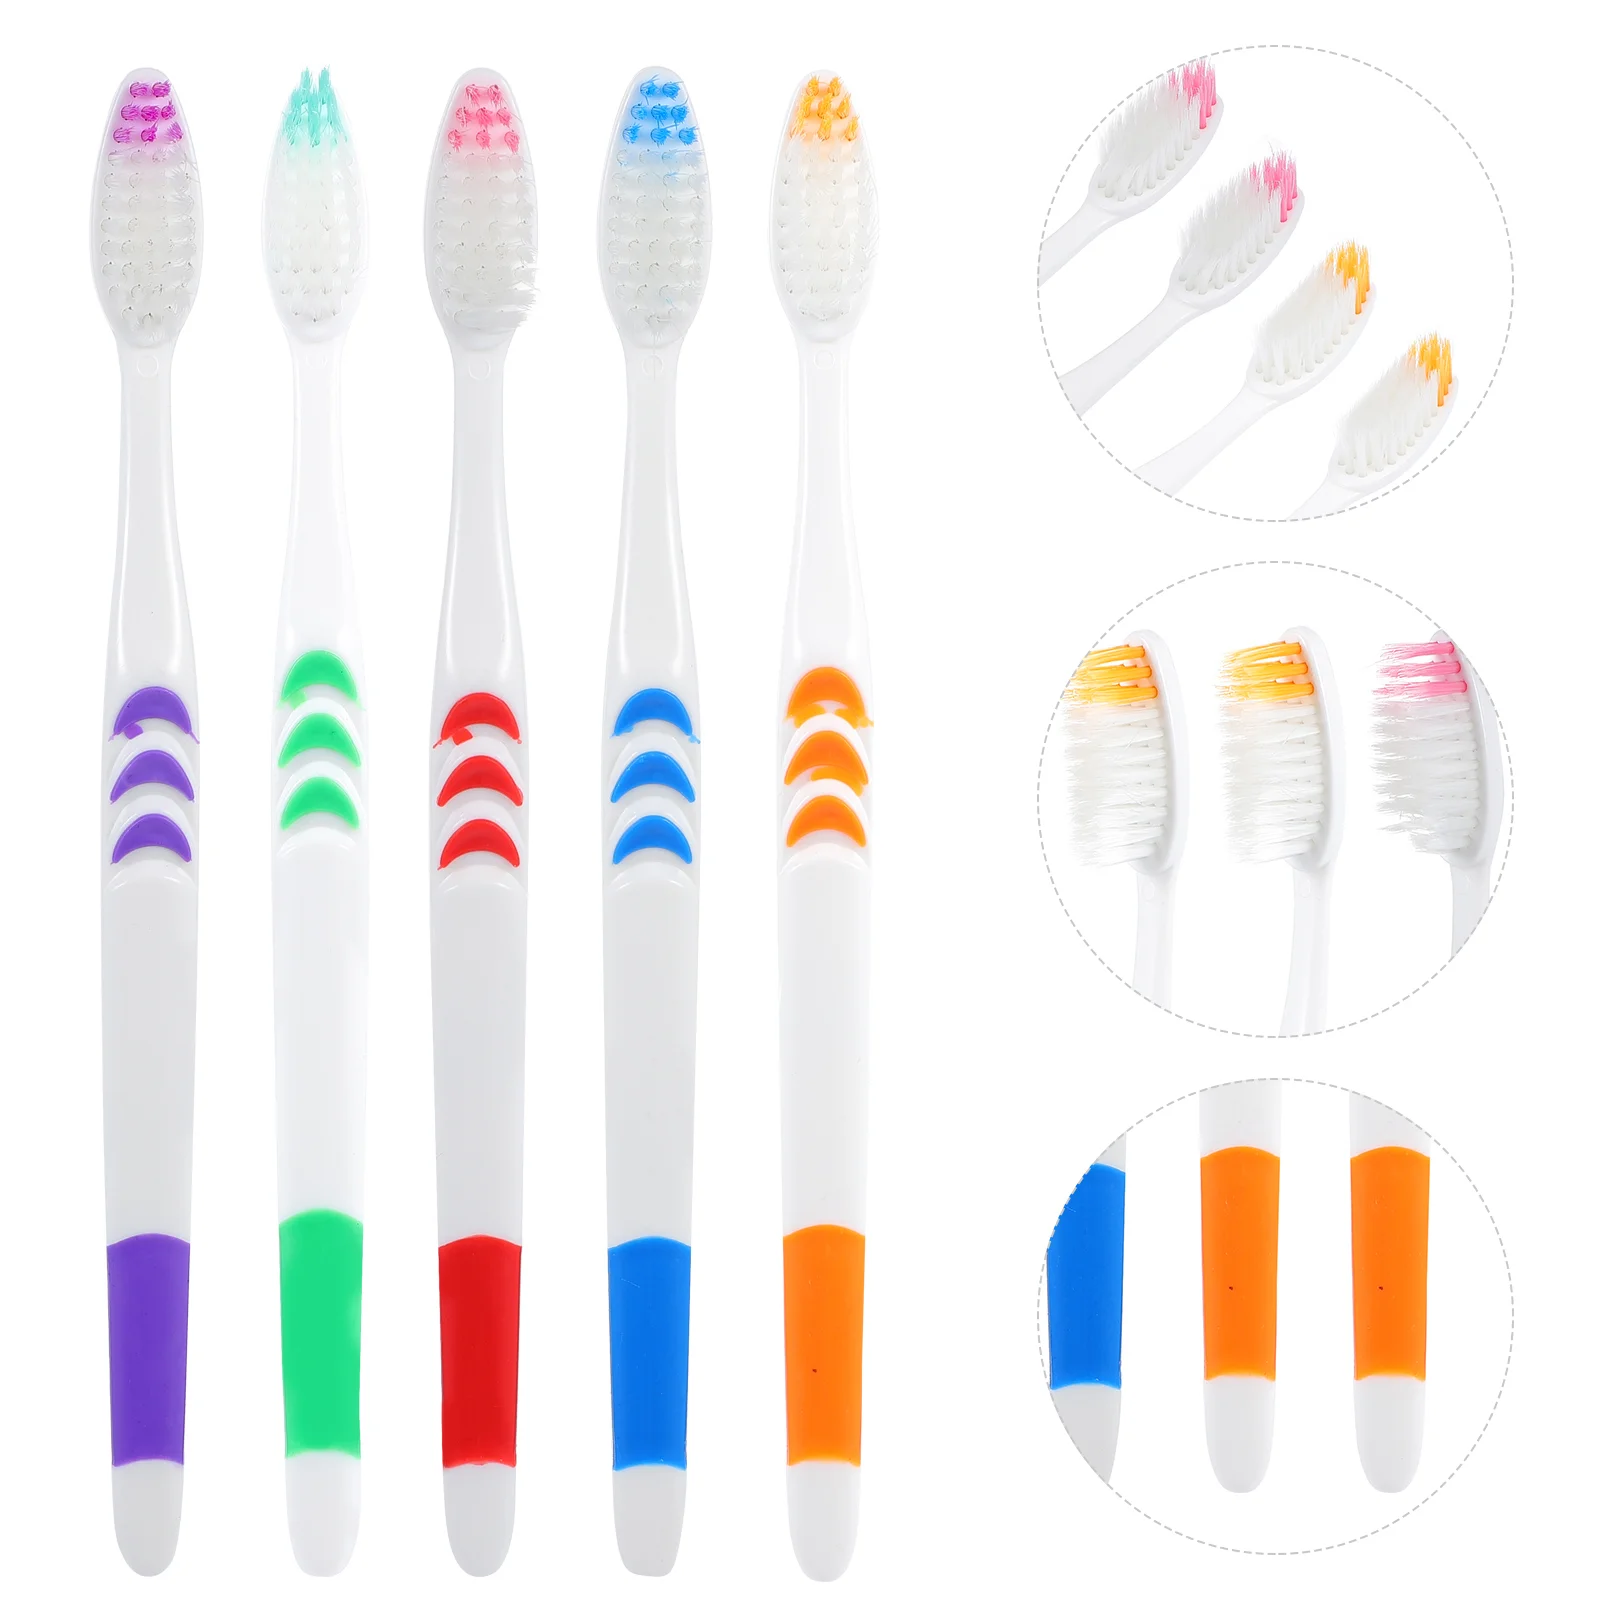 

30pcs durable practical Safe Oral Toothbrushes Tooth Cleaning Tools Disposable Toothbrushes for Family